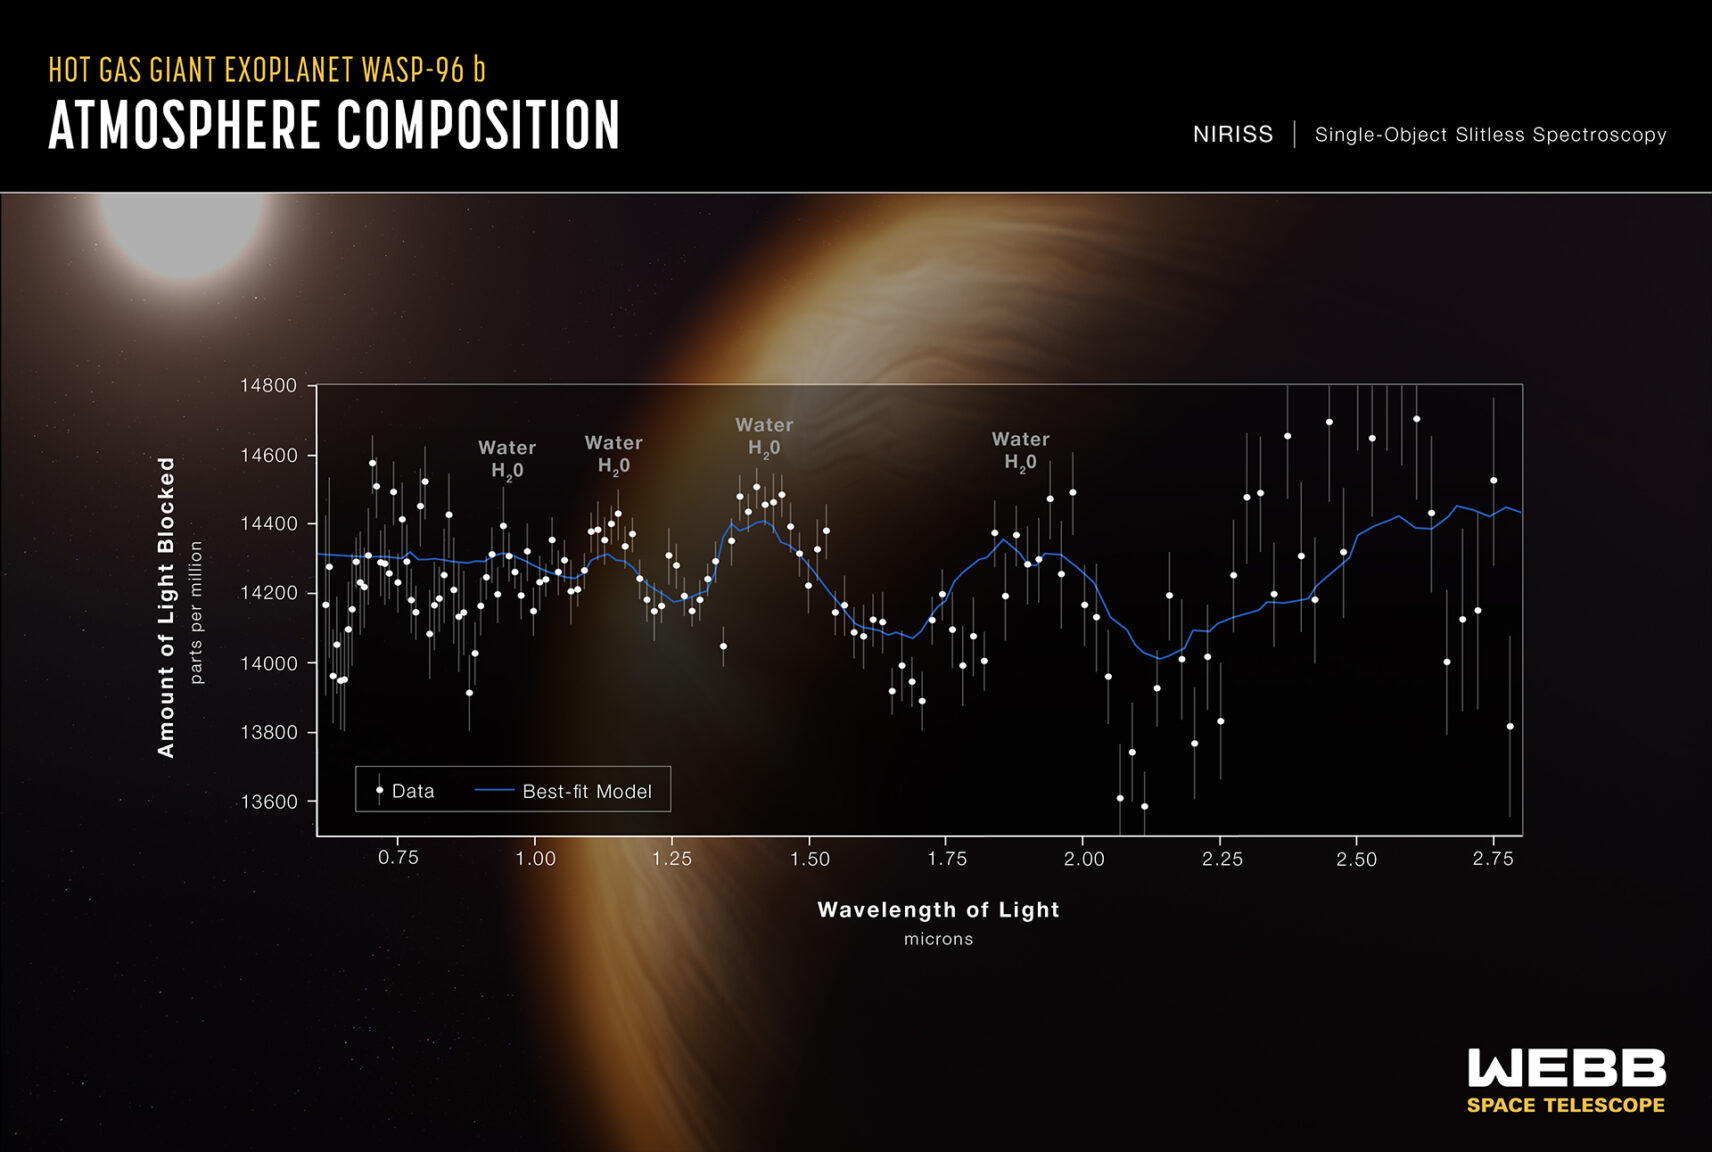 This James Webb image reveals the atmospheric composition of exoplanet WASP-96 b